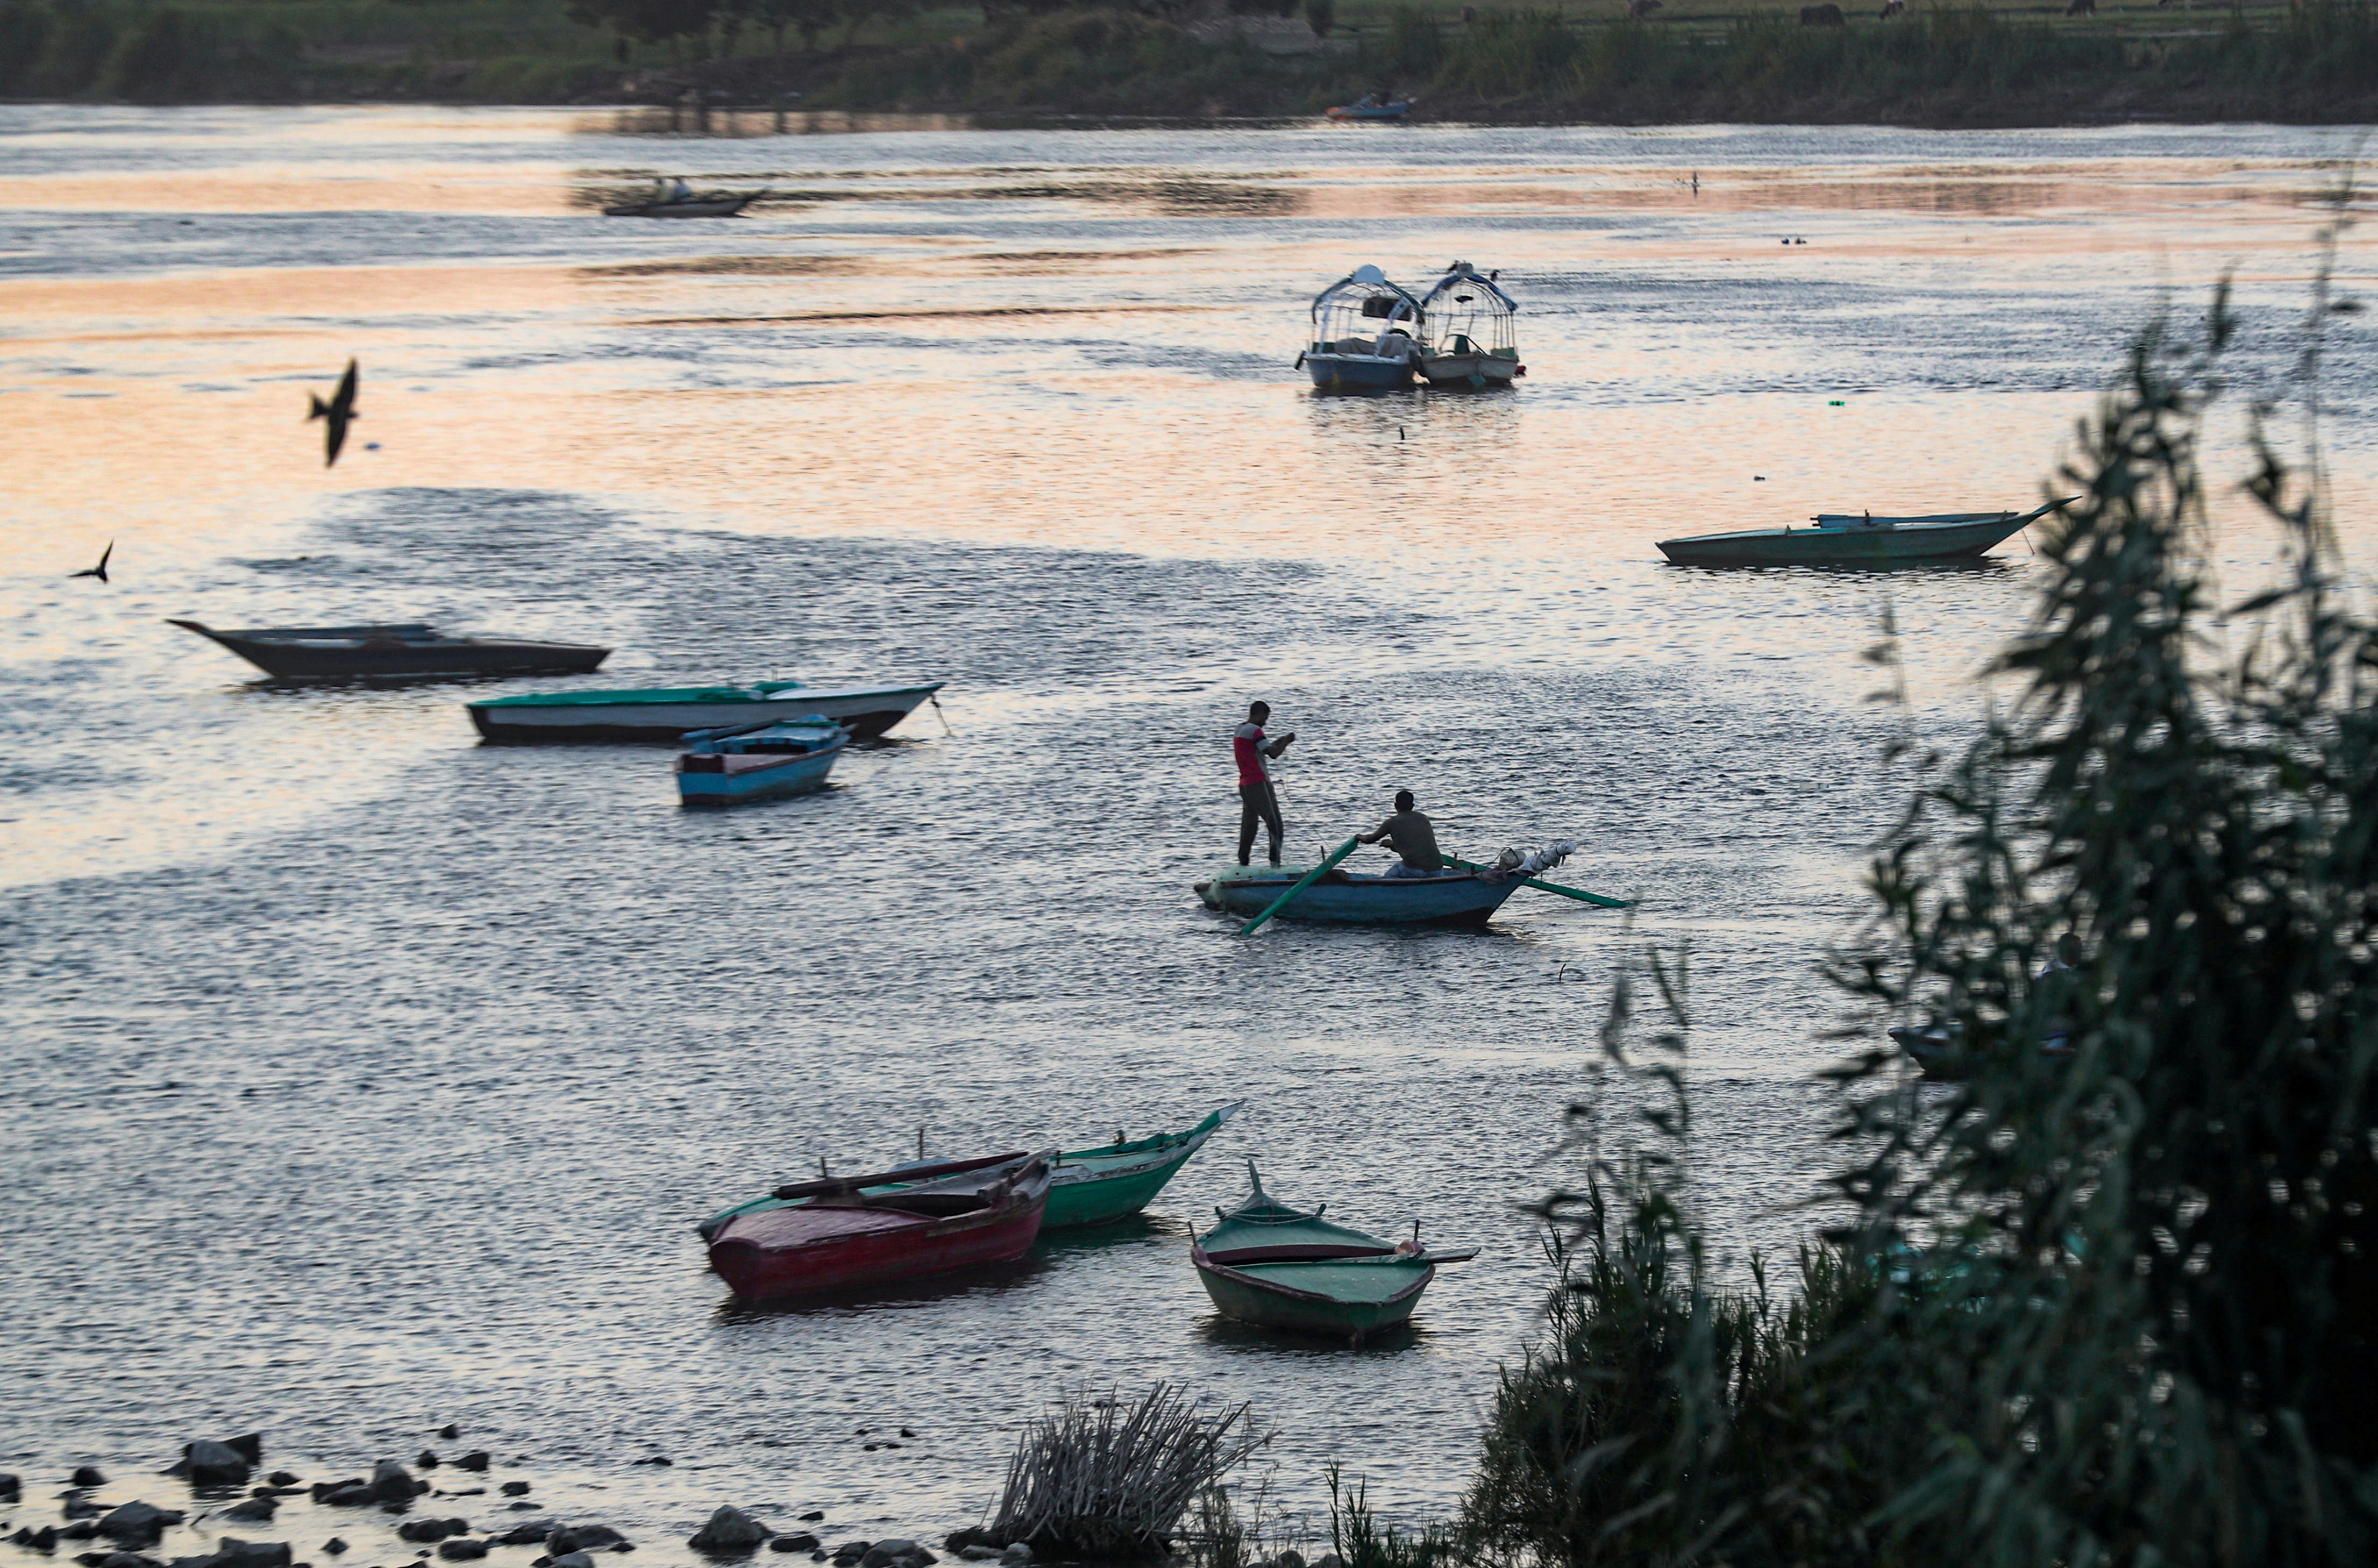 Fishermen are seen on a boat on the Nile River on the outskirts of Cairo, following the outbreak of the coronavirus disease (COVID-19)